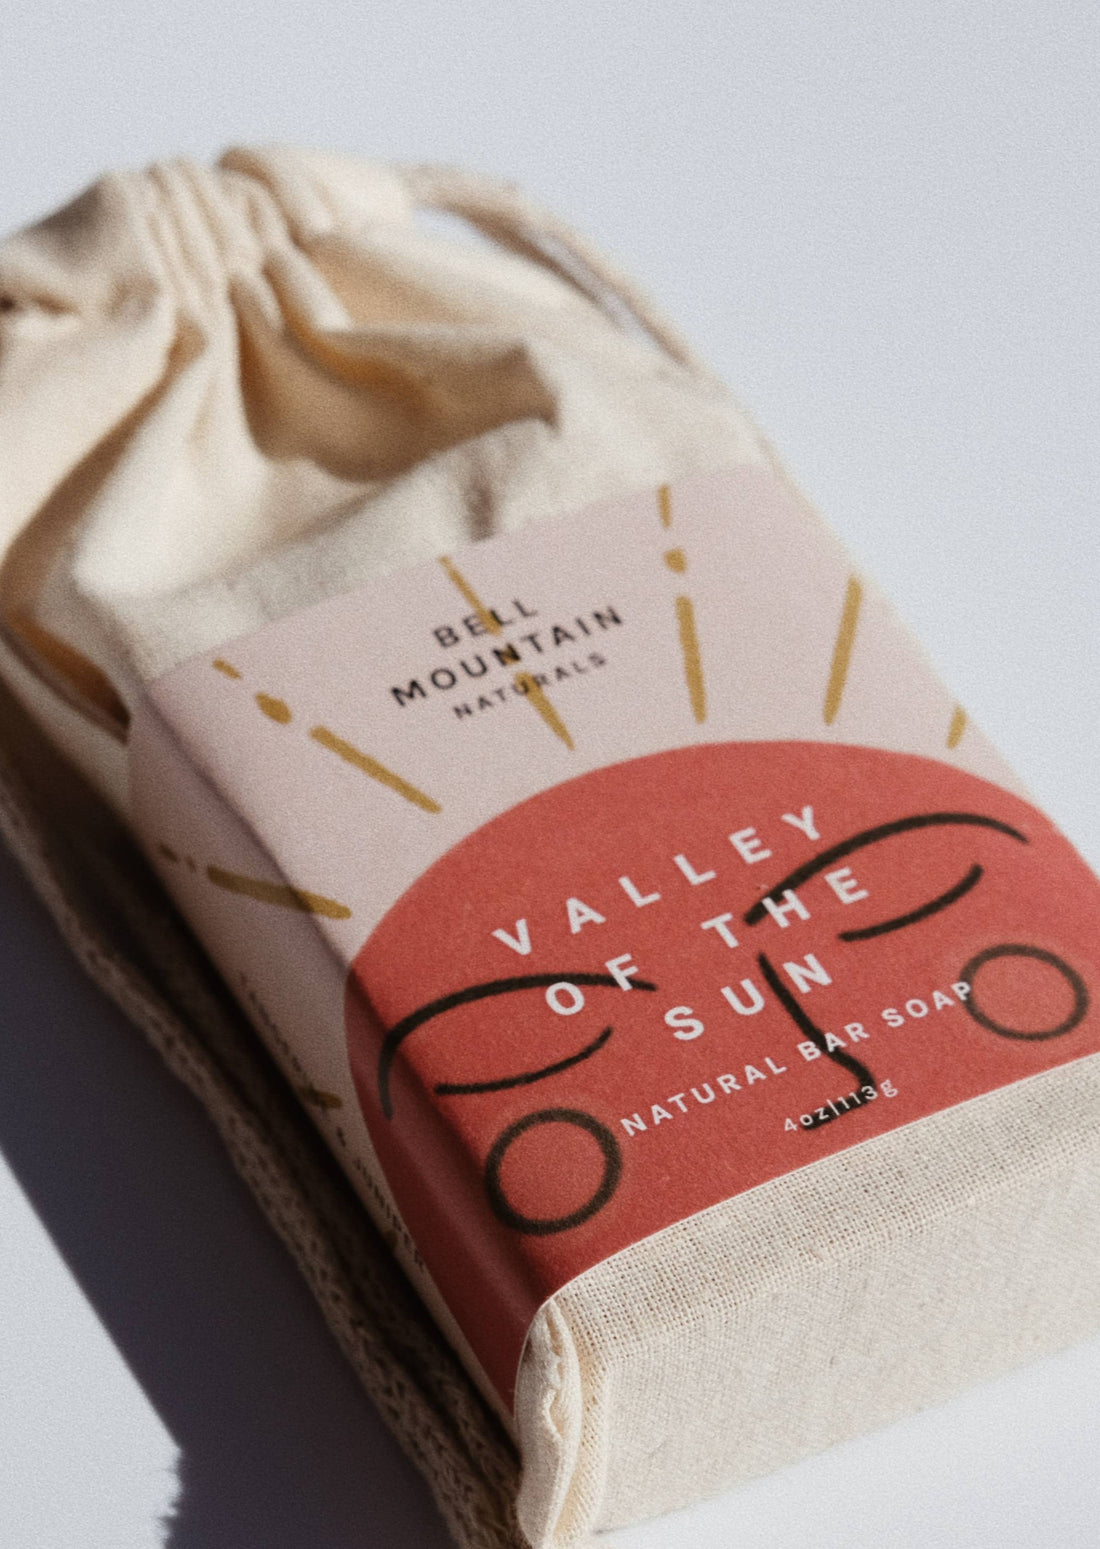 Bag of Valley of the Sun Natural Bar Soap